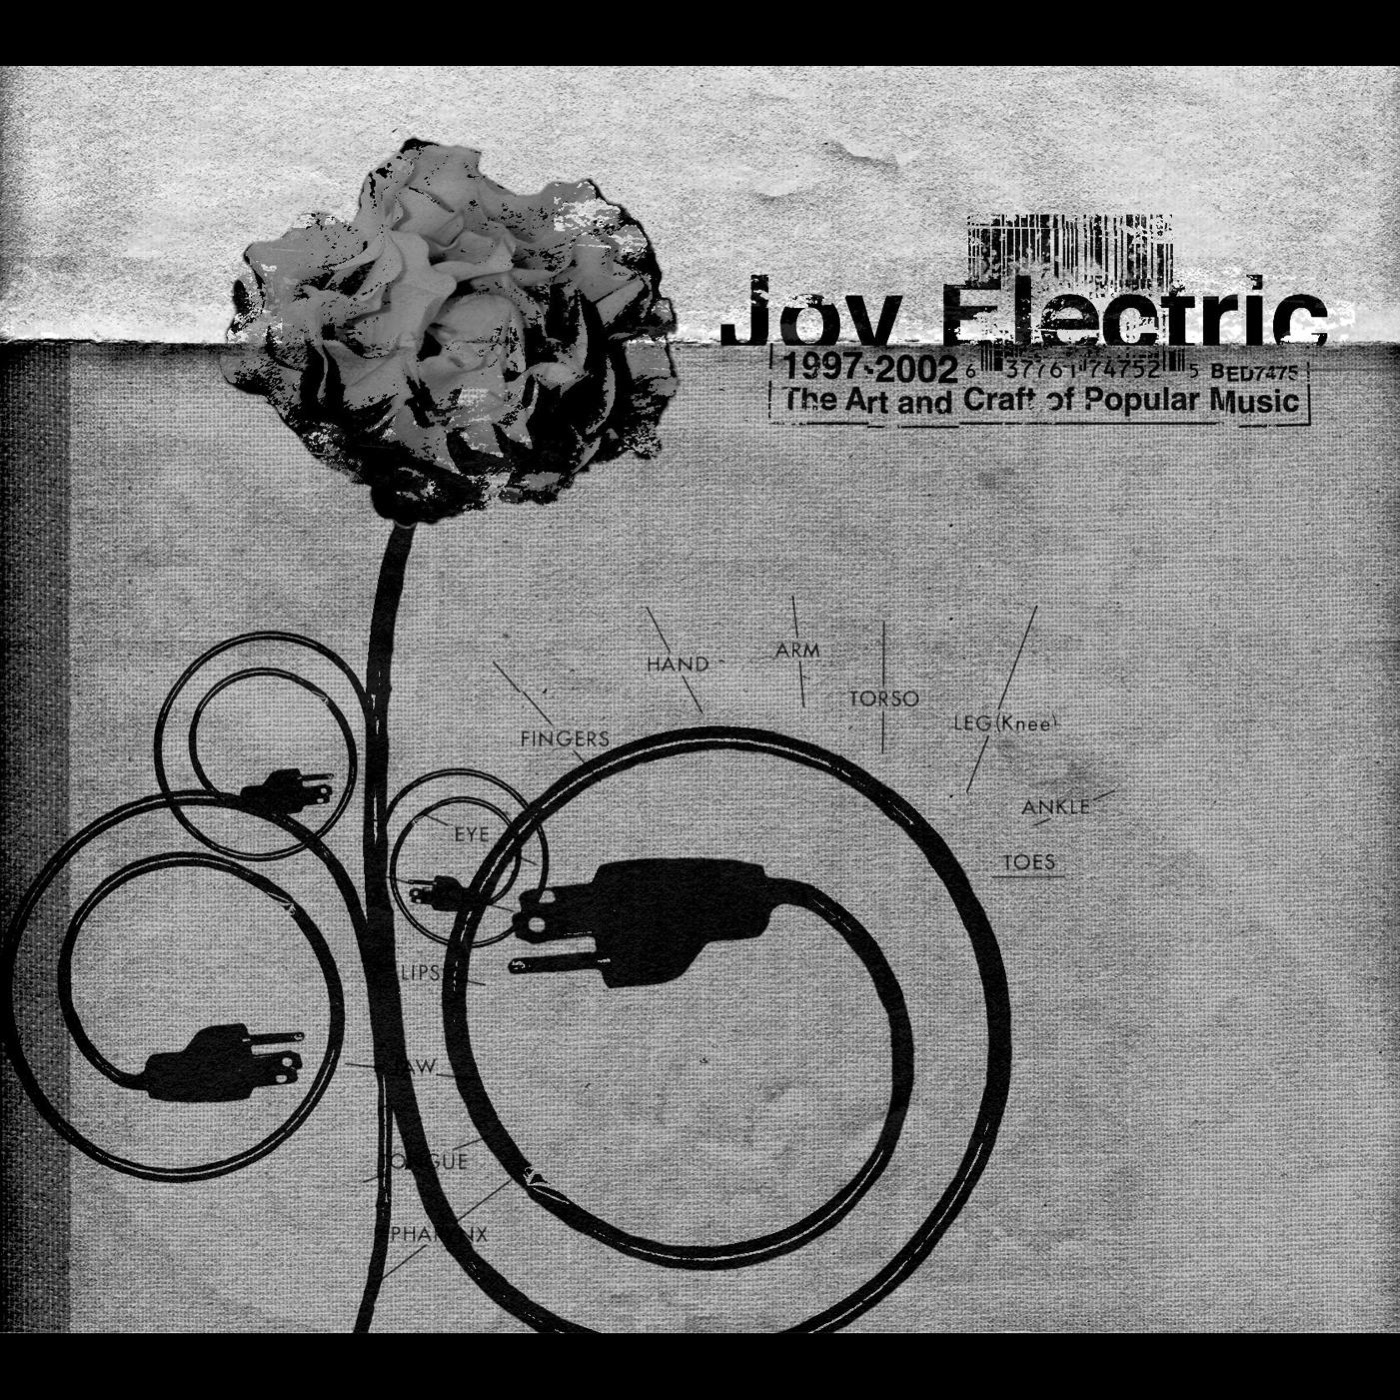 The Art And Craft Of Popular Music by Joy Electric